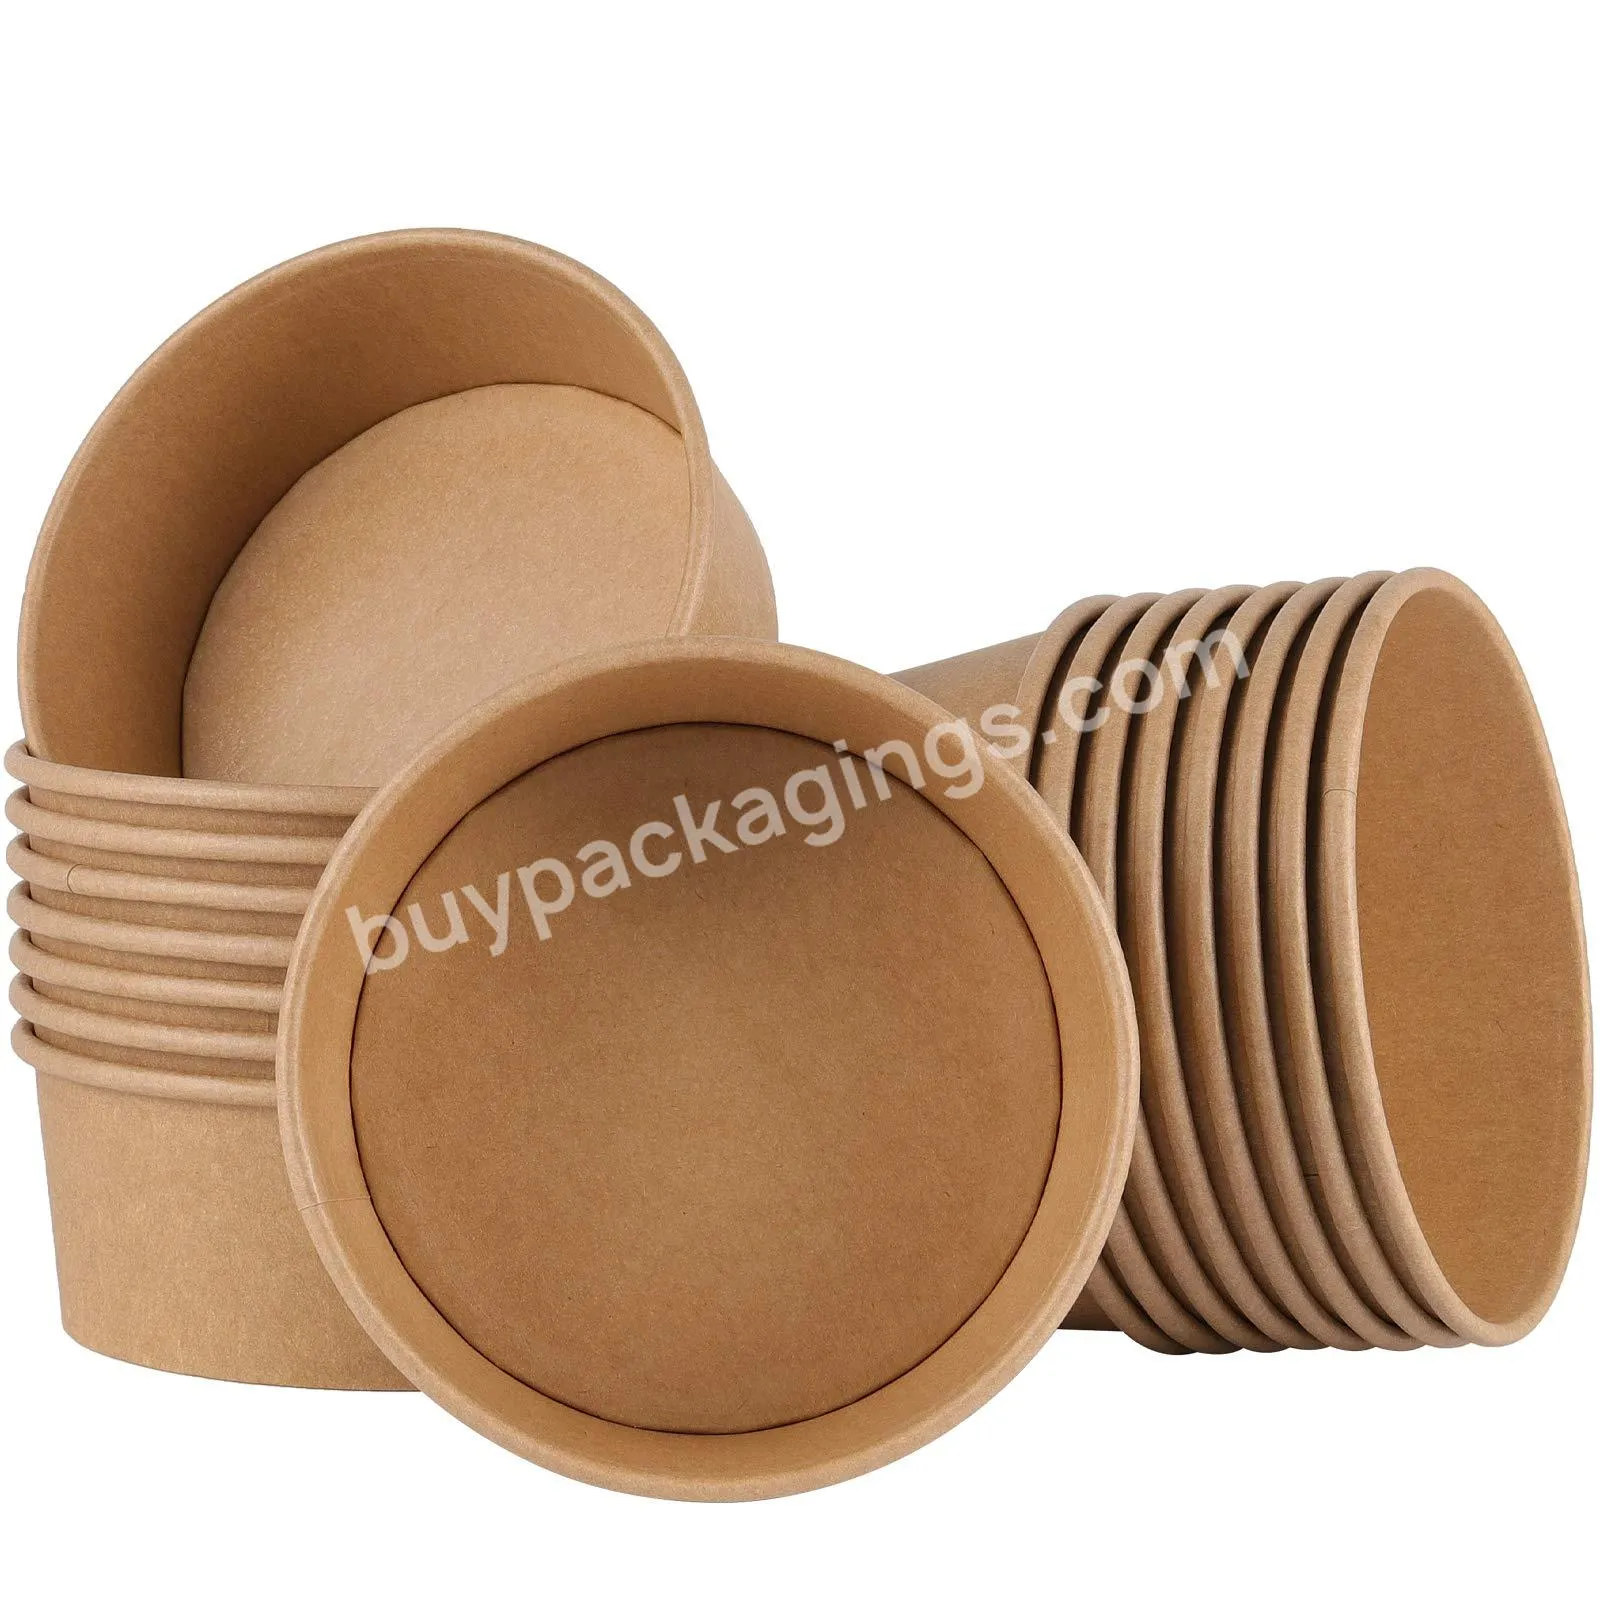 Hot Selling 37 Oz Brown Paper Bowls With Lids,Disposable Bowls For Salad,Soup,Hot/cold Food